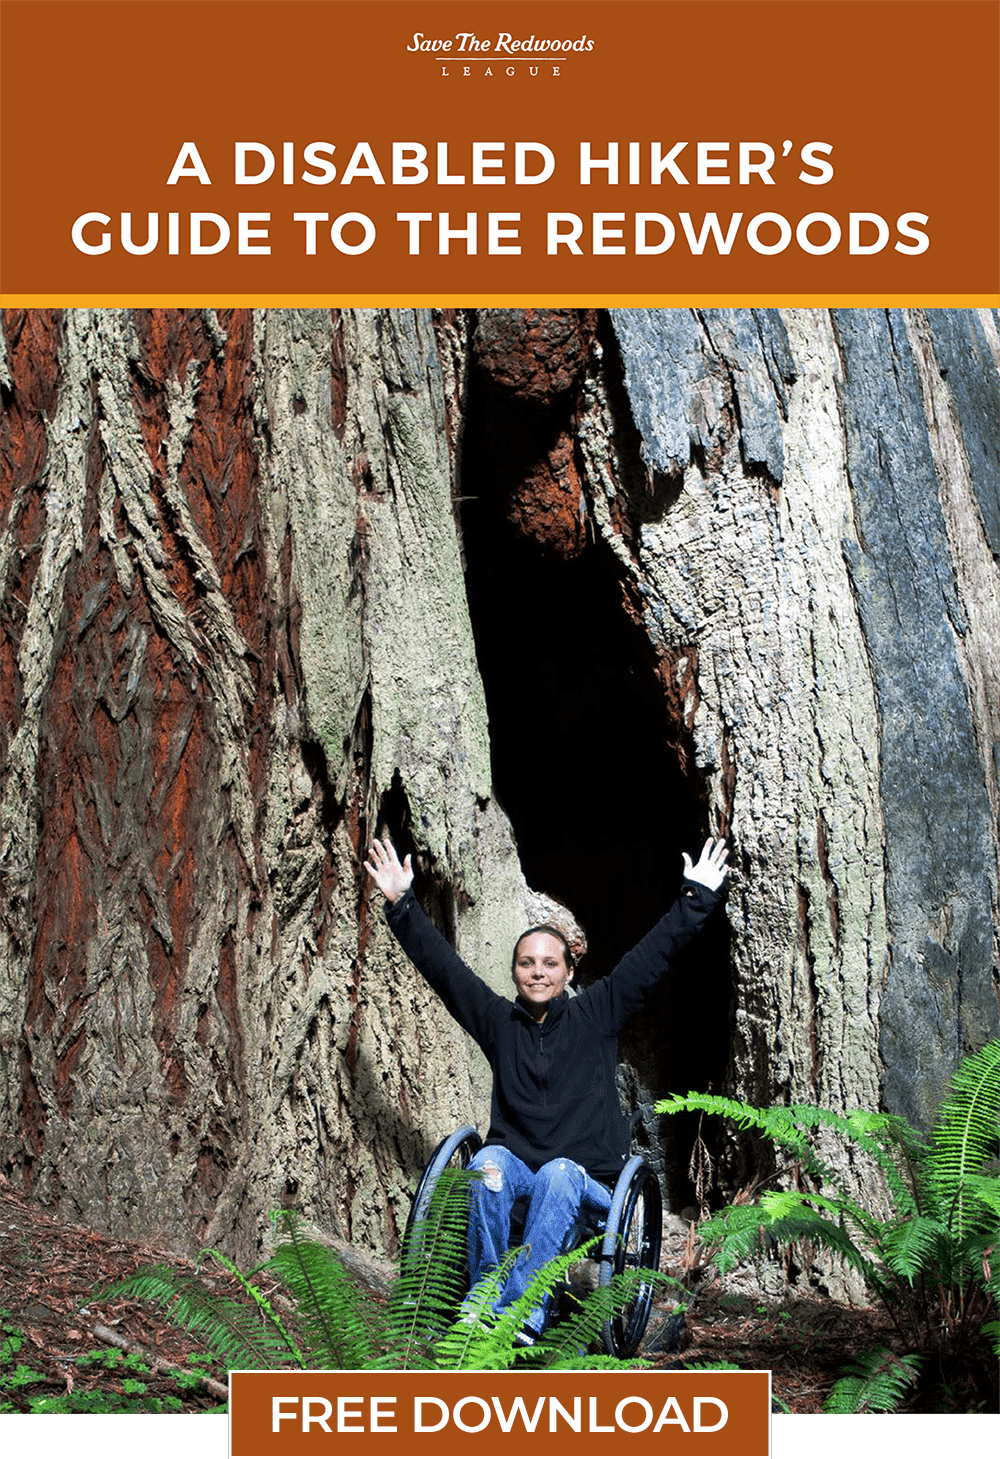 Photo of 'A Disabled Hiker’s Guide to the Redwoods' showing the guide's cover